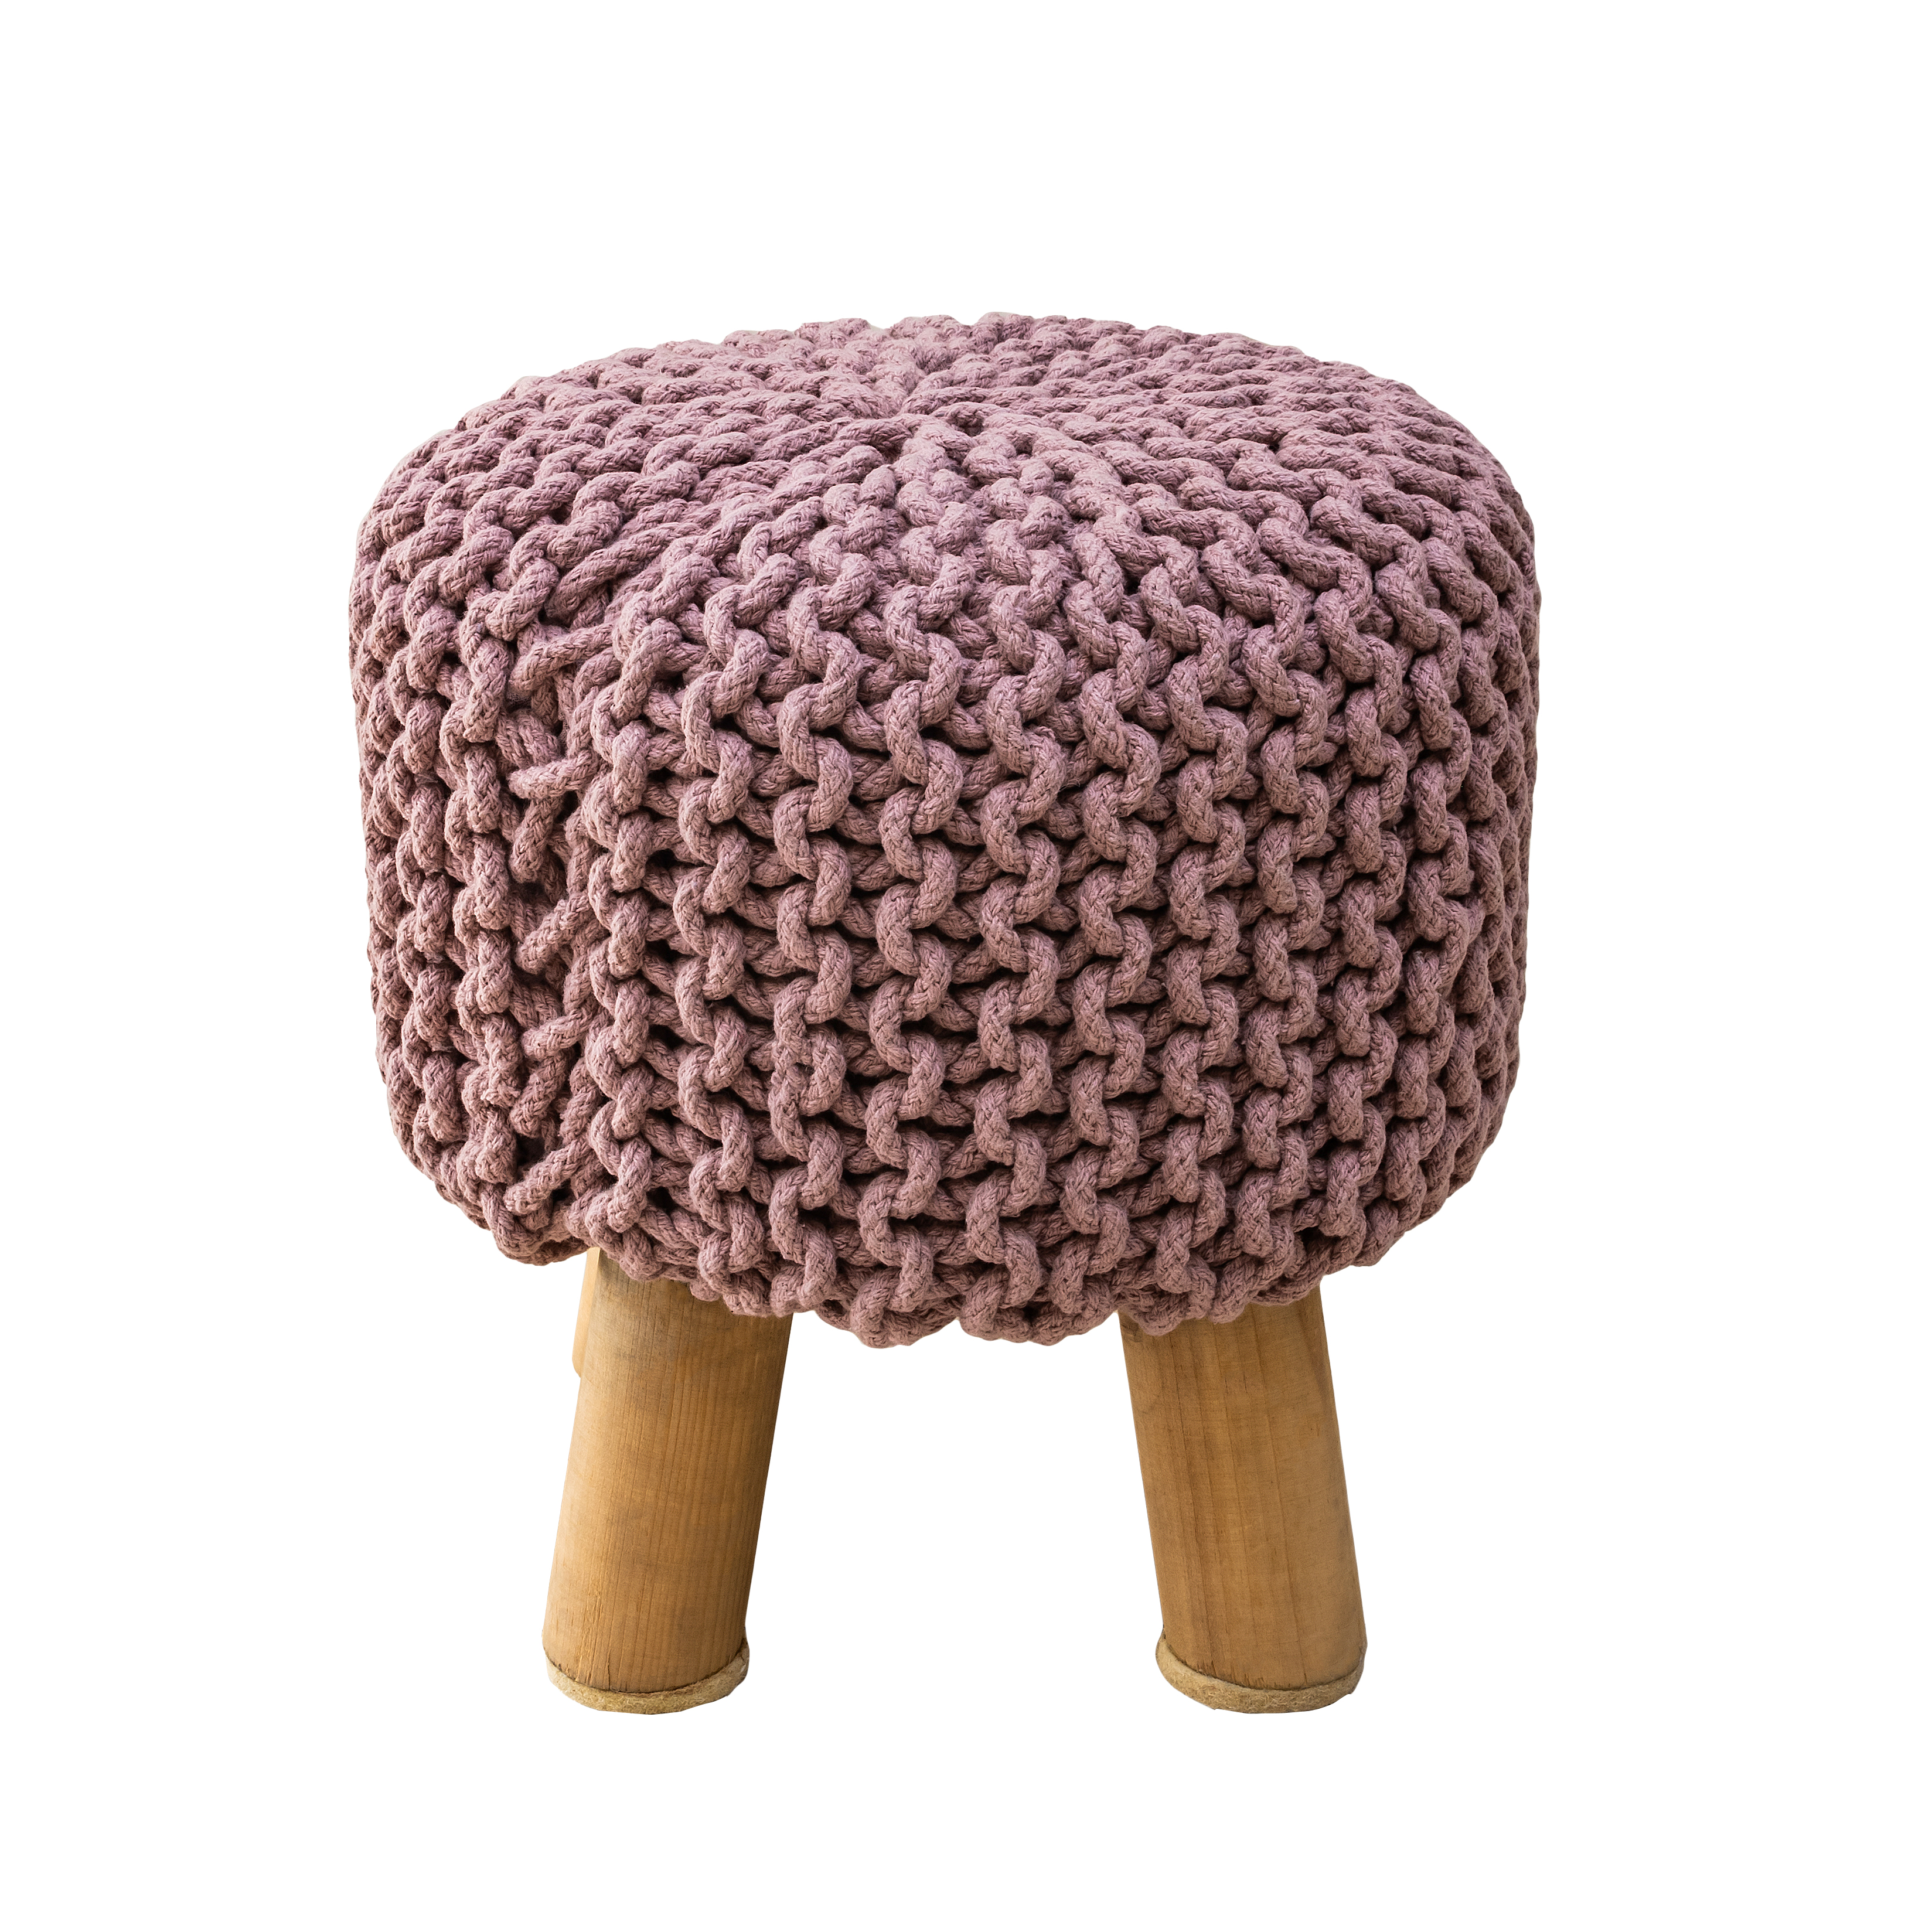 Kids Hand Knitted Cotton Braided Foot Rest Sitting Stool Ottoman Image